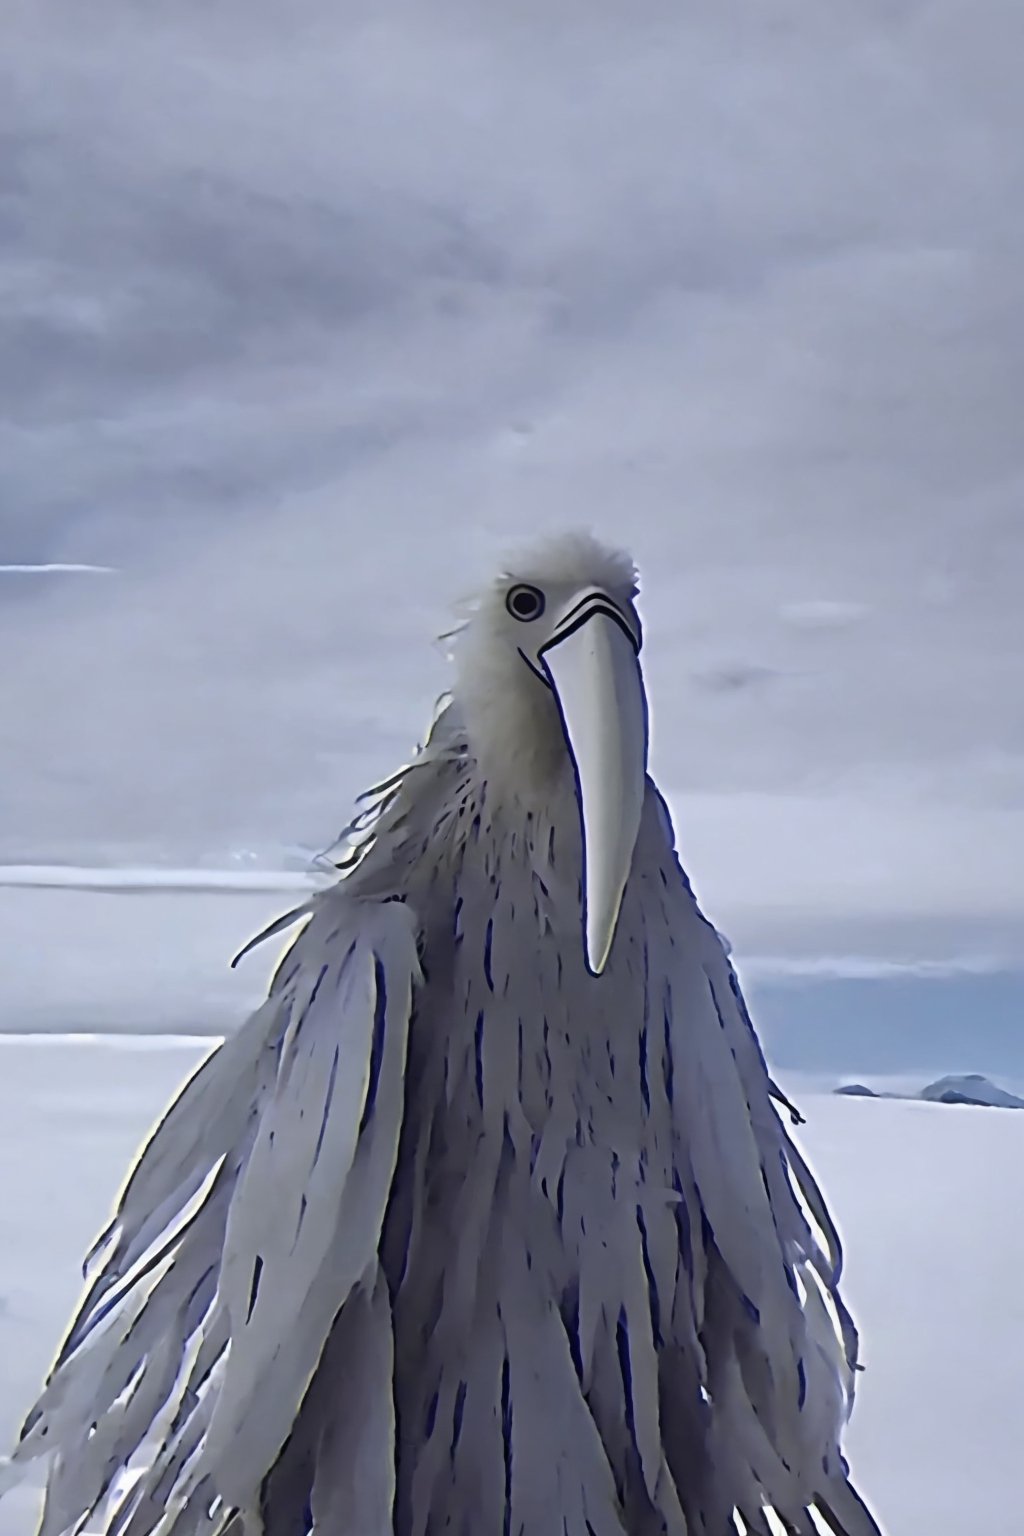 Opium bird, standing, feathers, white feathers, bird, birdman, humanoid, bird head, with extremely long beak, long beak, long mouth, stylized, thin, full body, bird legs, bird arms, sinister, terrifying, beautiful

High quality, HD, 4kHD, cinematic, atmospheric, realistic, ultra-realistic
snow, mountain, cloudy, gray sky, dark clouds
More Detail,lora:largebulg1-000012:1,AIDA_NH_humans